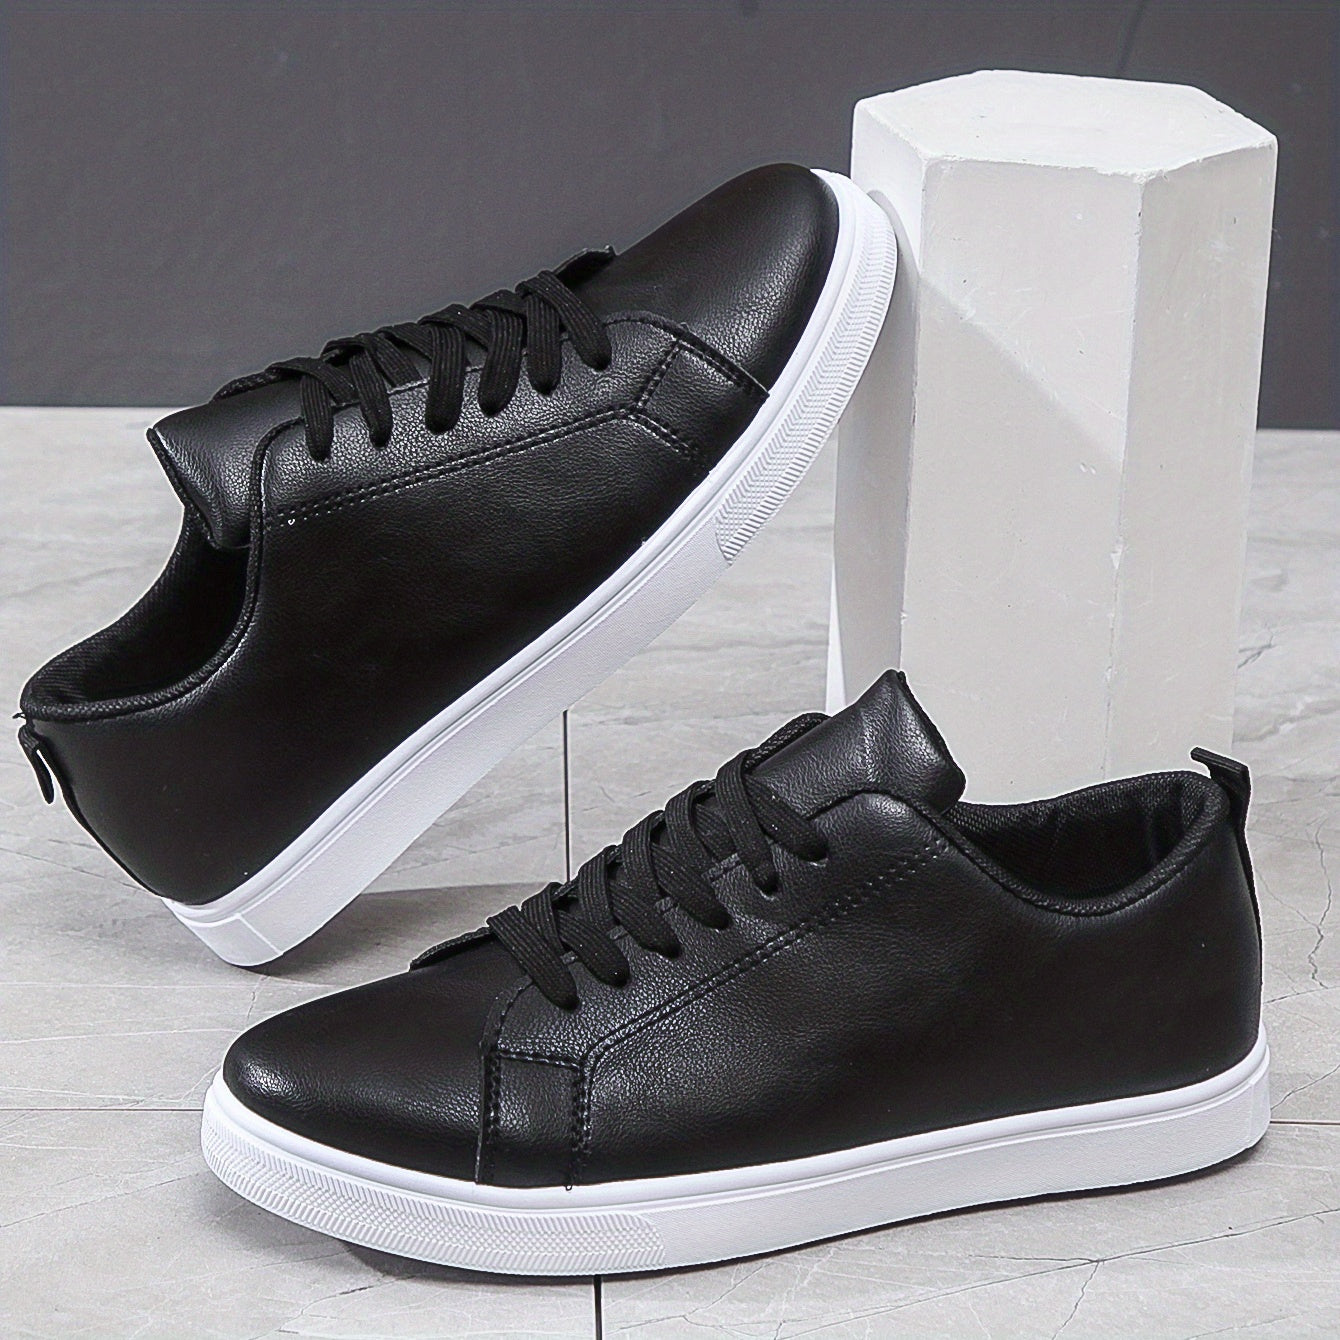 Men's PU Leather Lace-up Skate Sneakers, Breathable